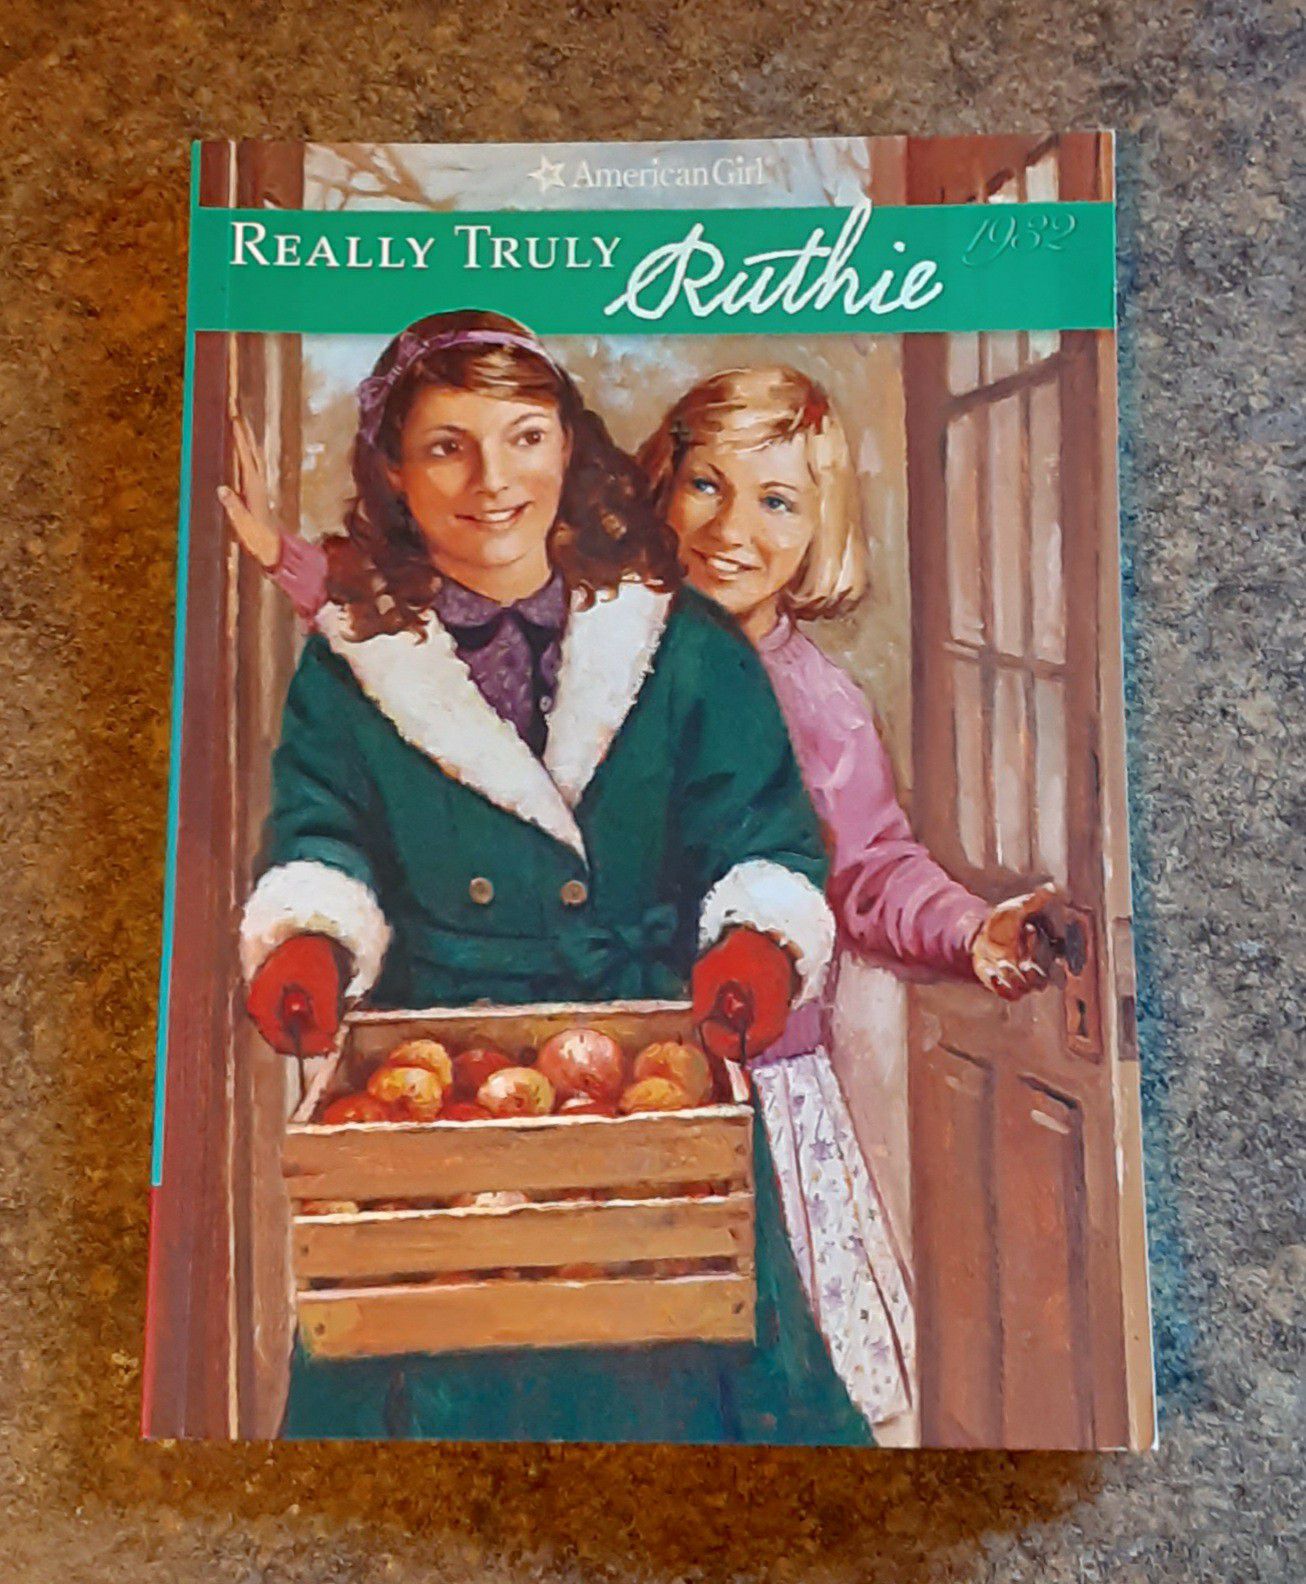 American Girl "Really Truly Ruthie" Children's Softcover Book - VGC